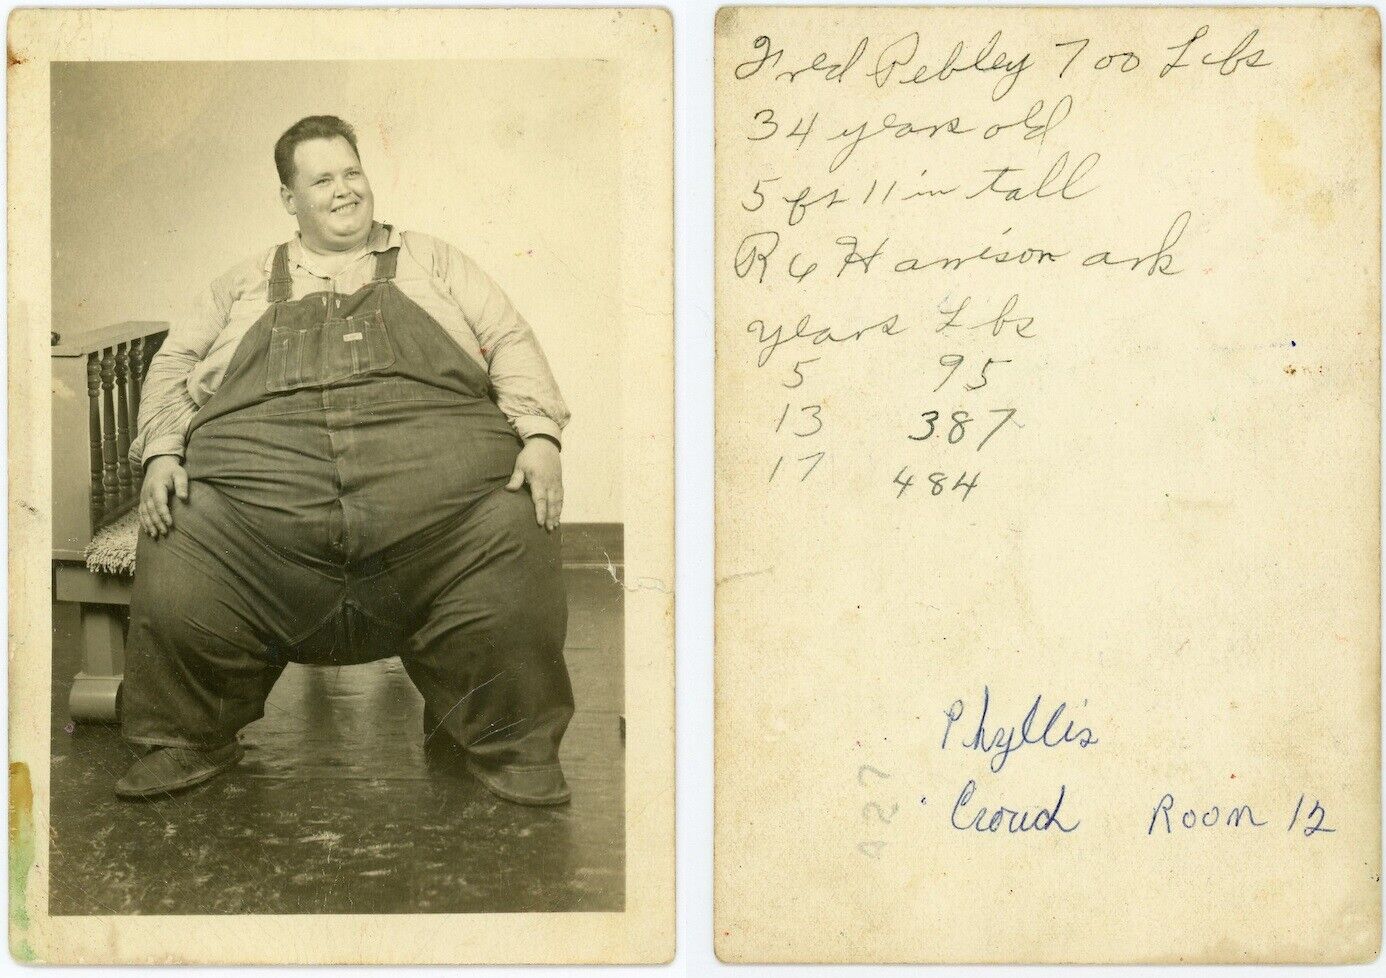 Antique Photo 700 lb Man Obese Overweight Large Guy Freak Show Weight Rare 55